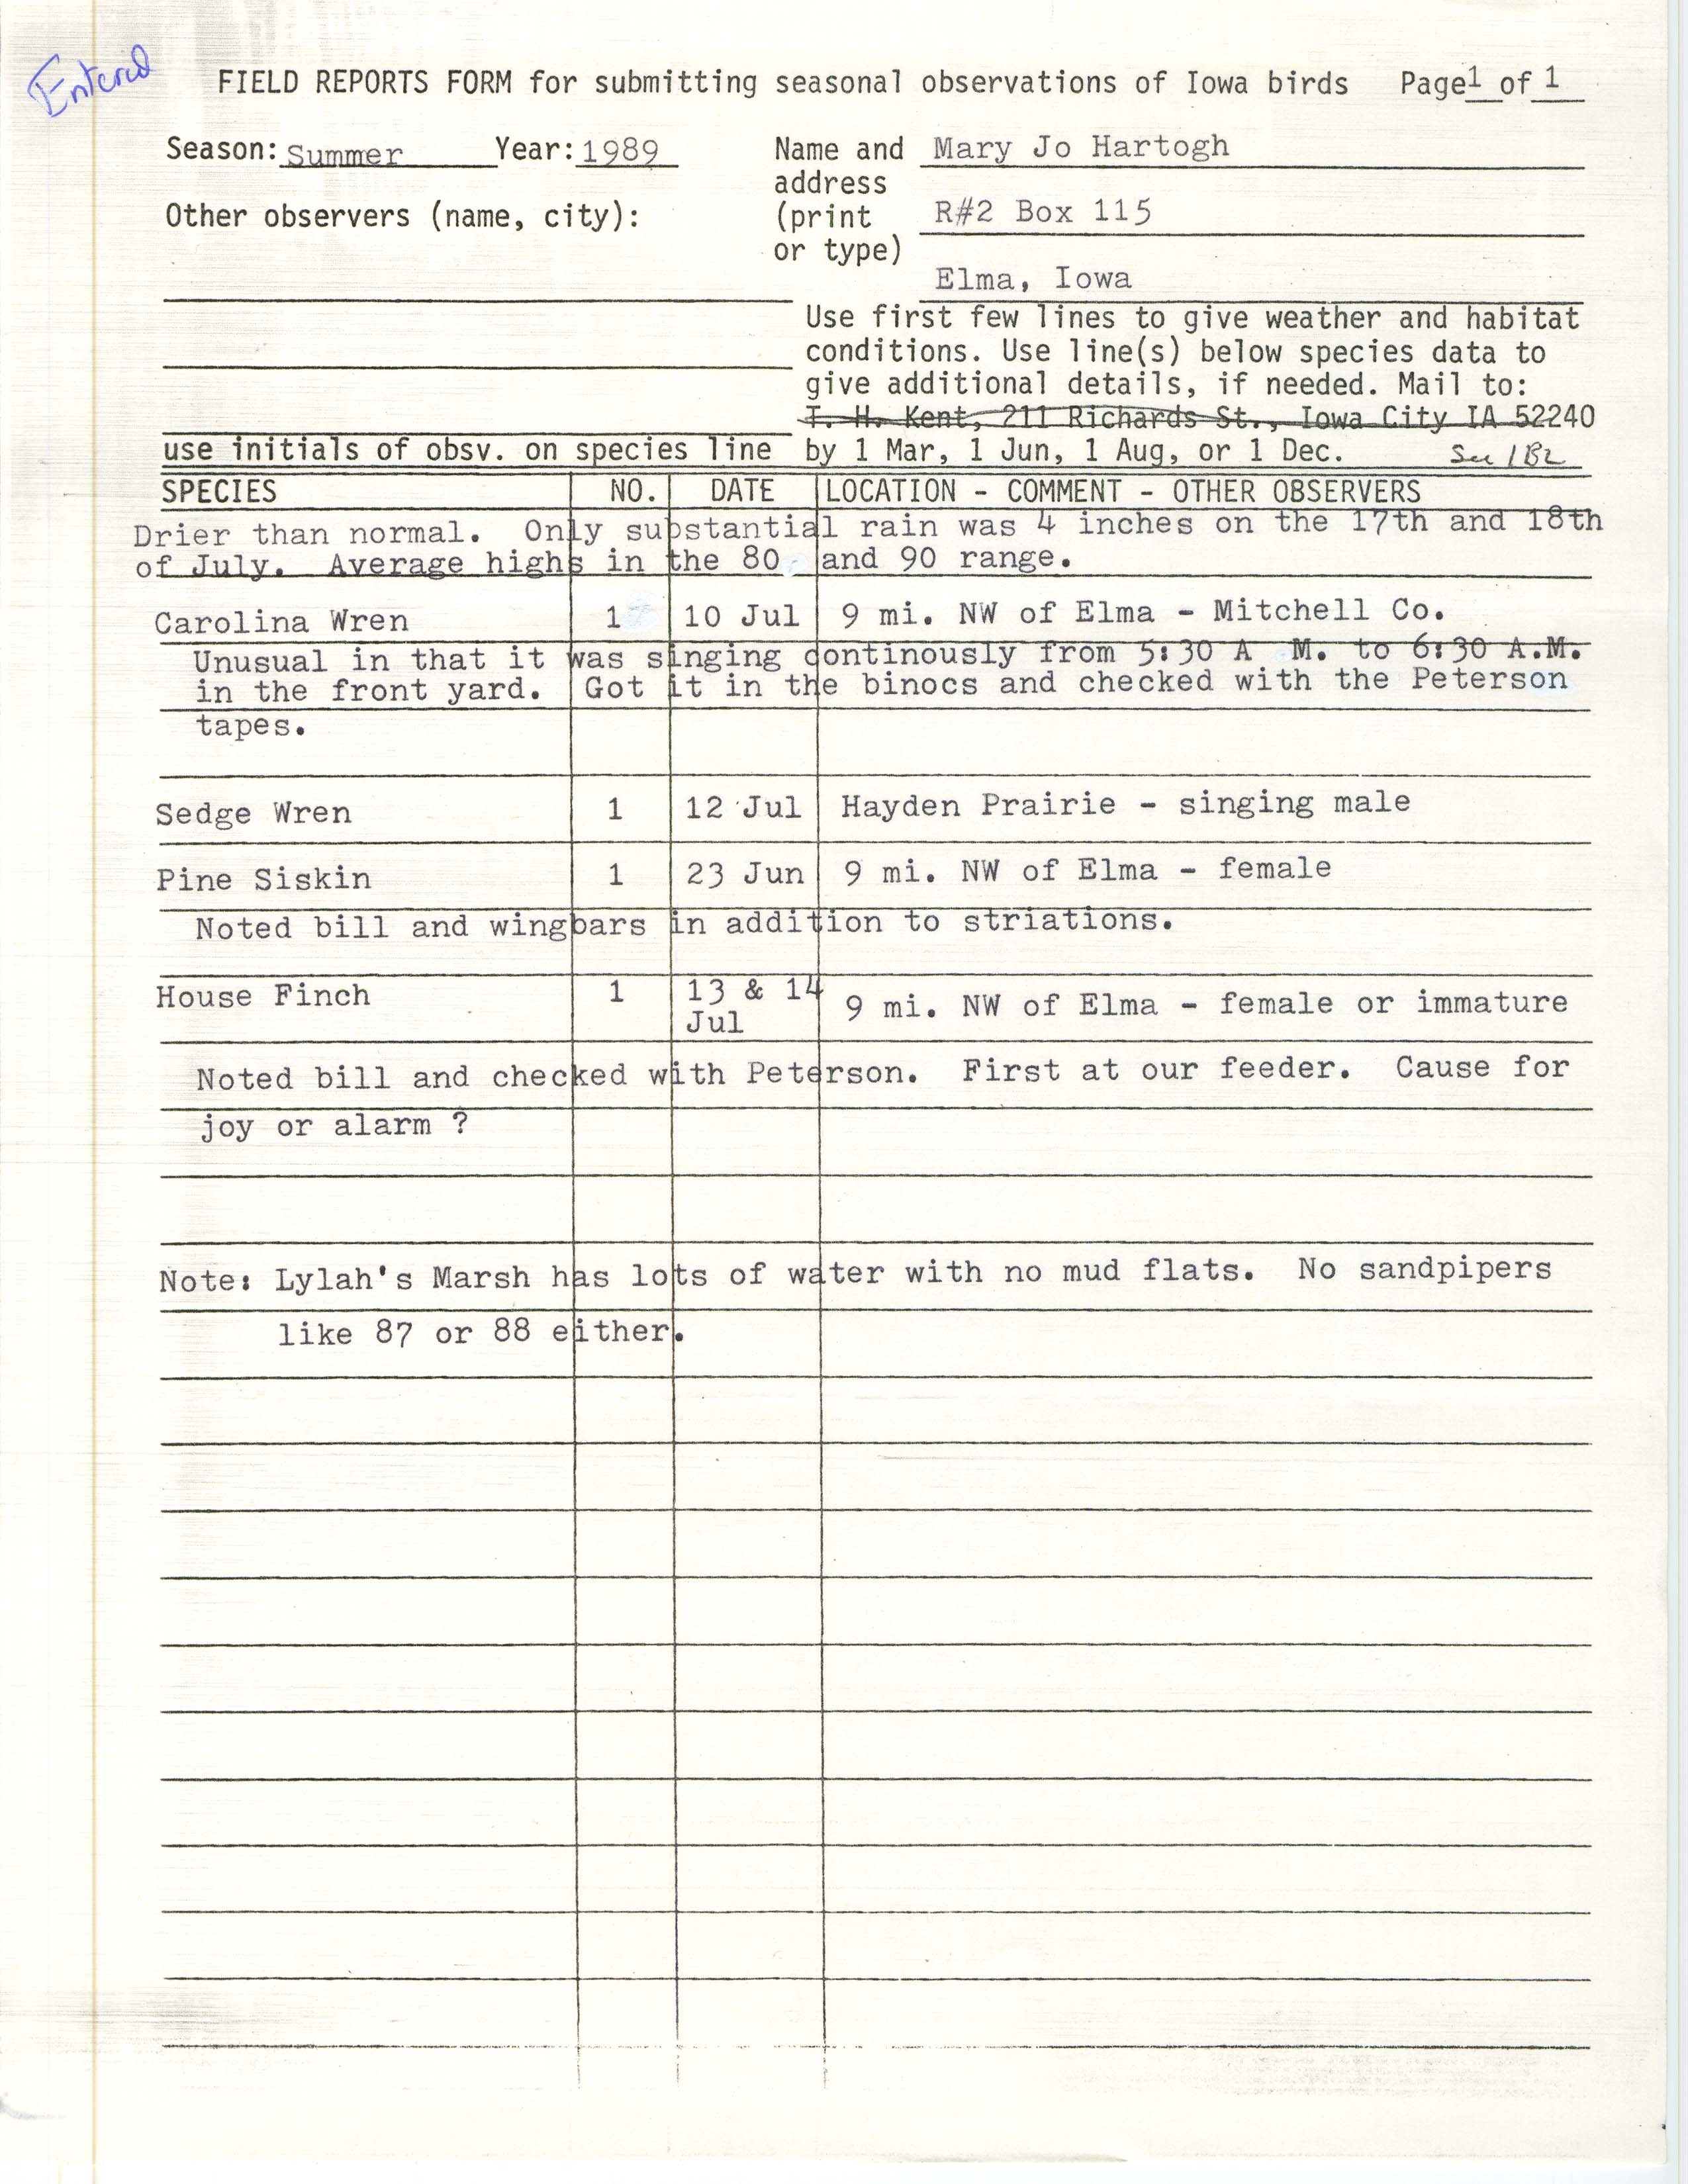 Field reports form for submitting seasonal observations of Iowa birds, Mary Jo Hartogh, summer 1989